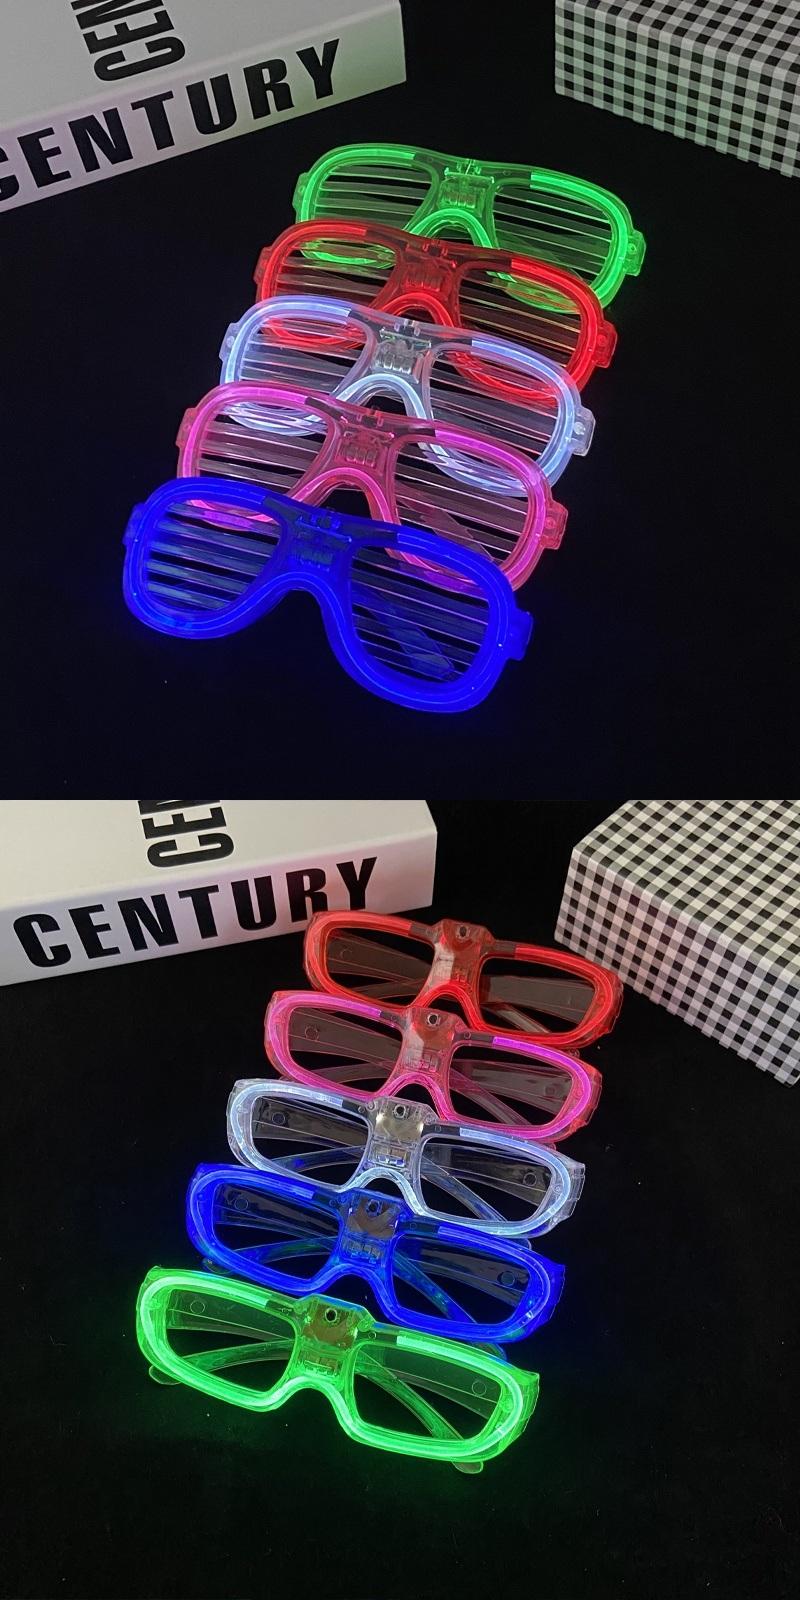 LED Light Glasses for Christmas Birthday Halloween Party Decoration